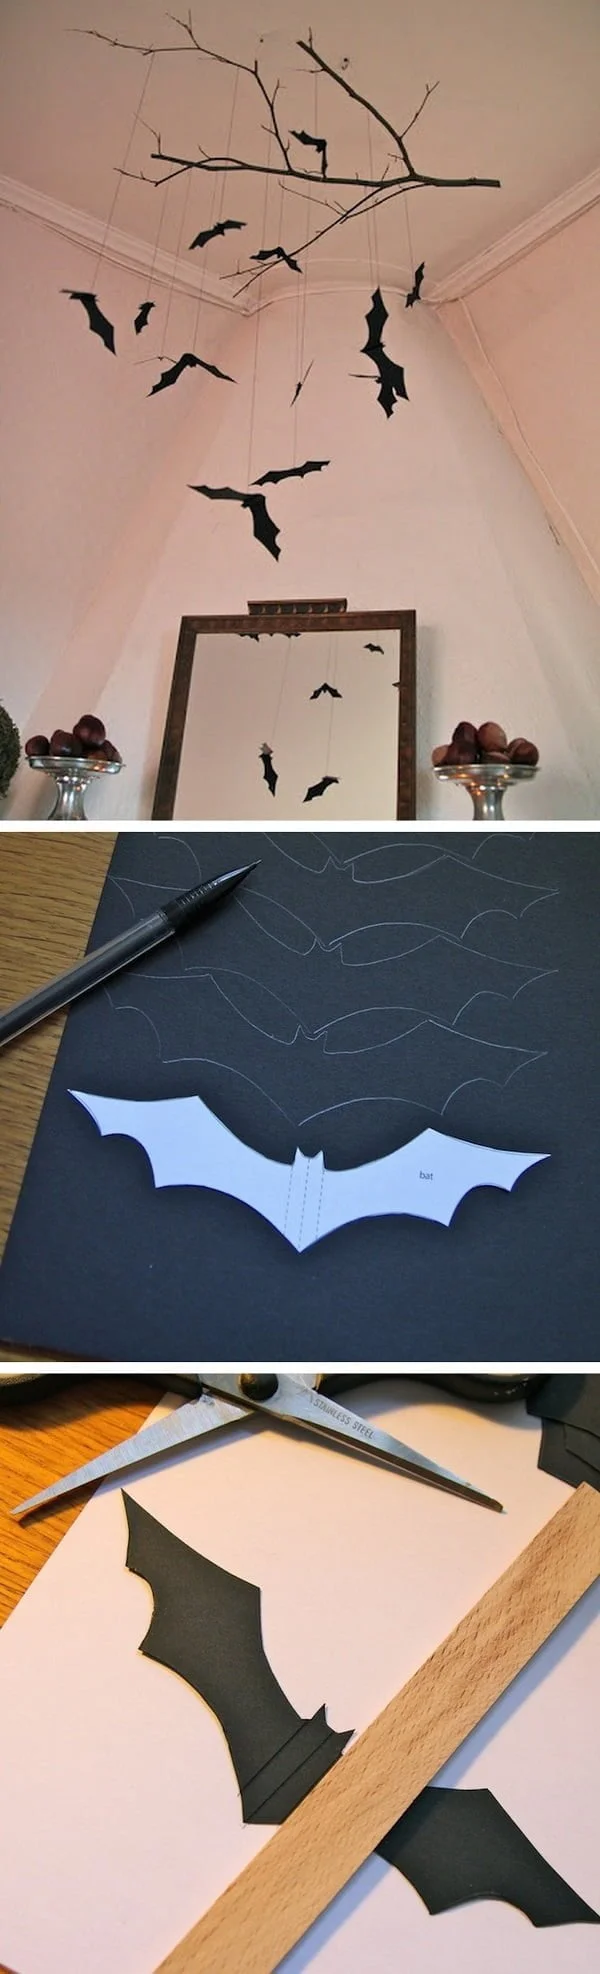 Check out the tutorial on how to make a DIY bat mobile for Halloween home decoration